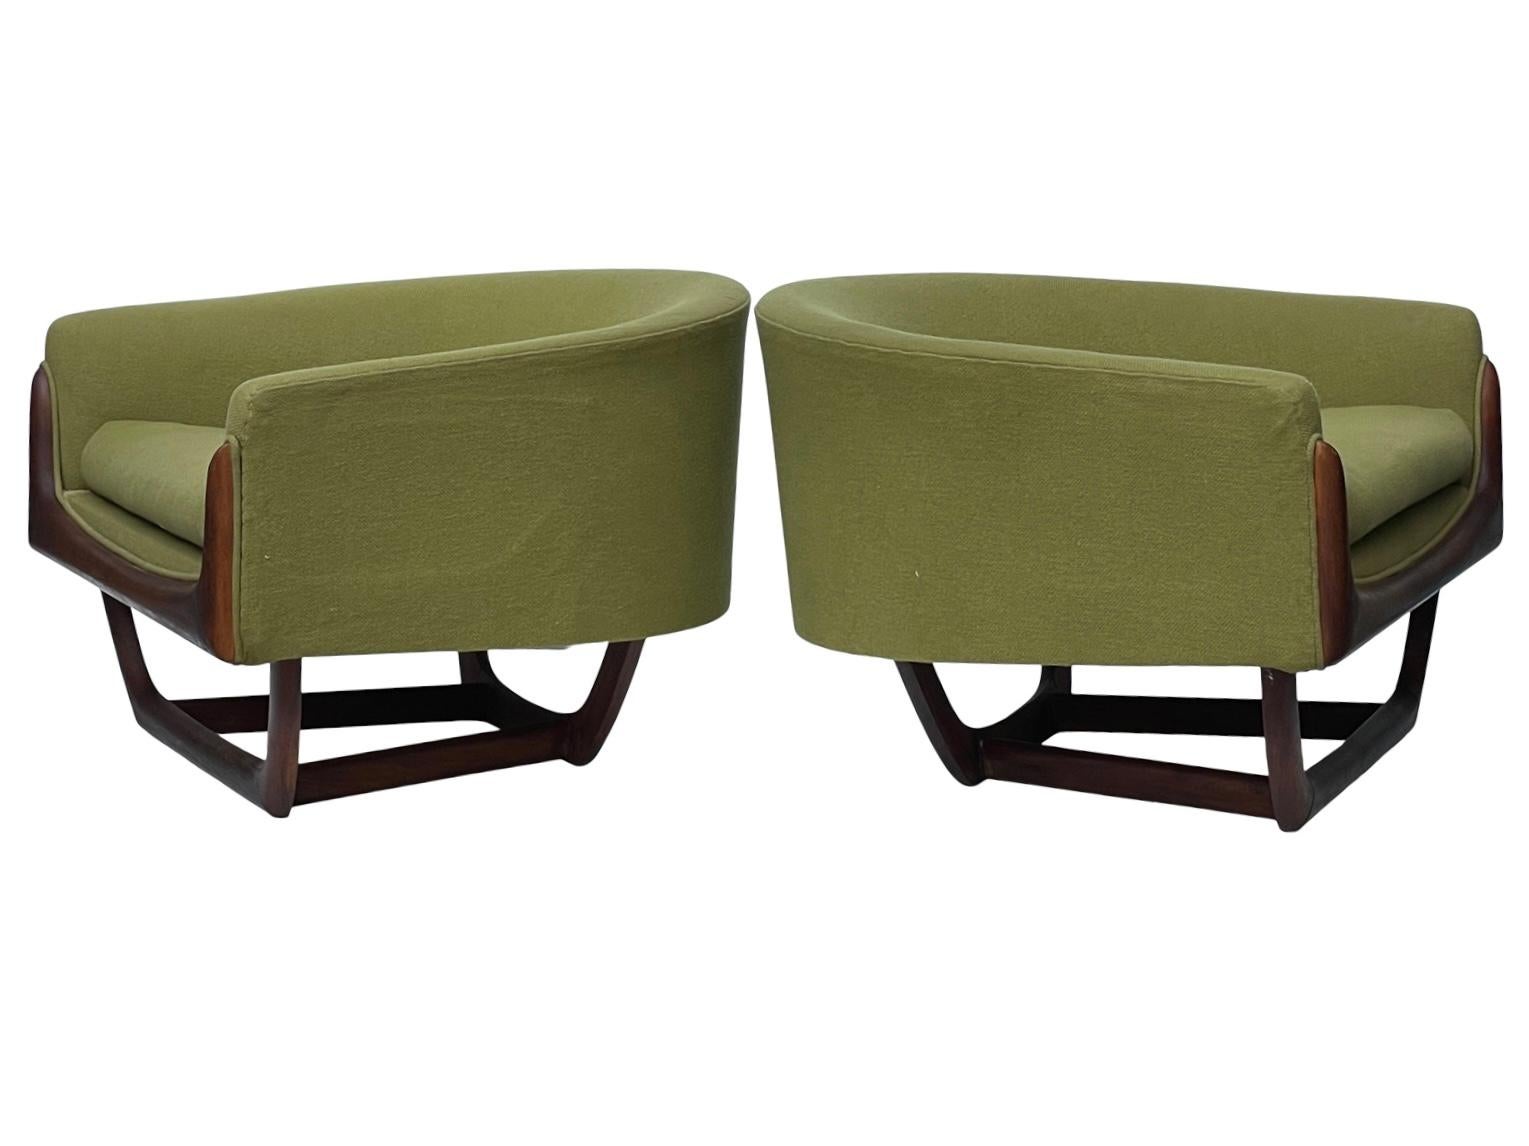 Epic pair of original Adrian Pearsall 2832-c lounge chairs with original 1960s sage green tweed upholstery with oiled walnut base 